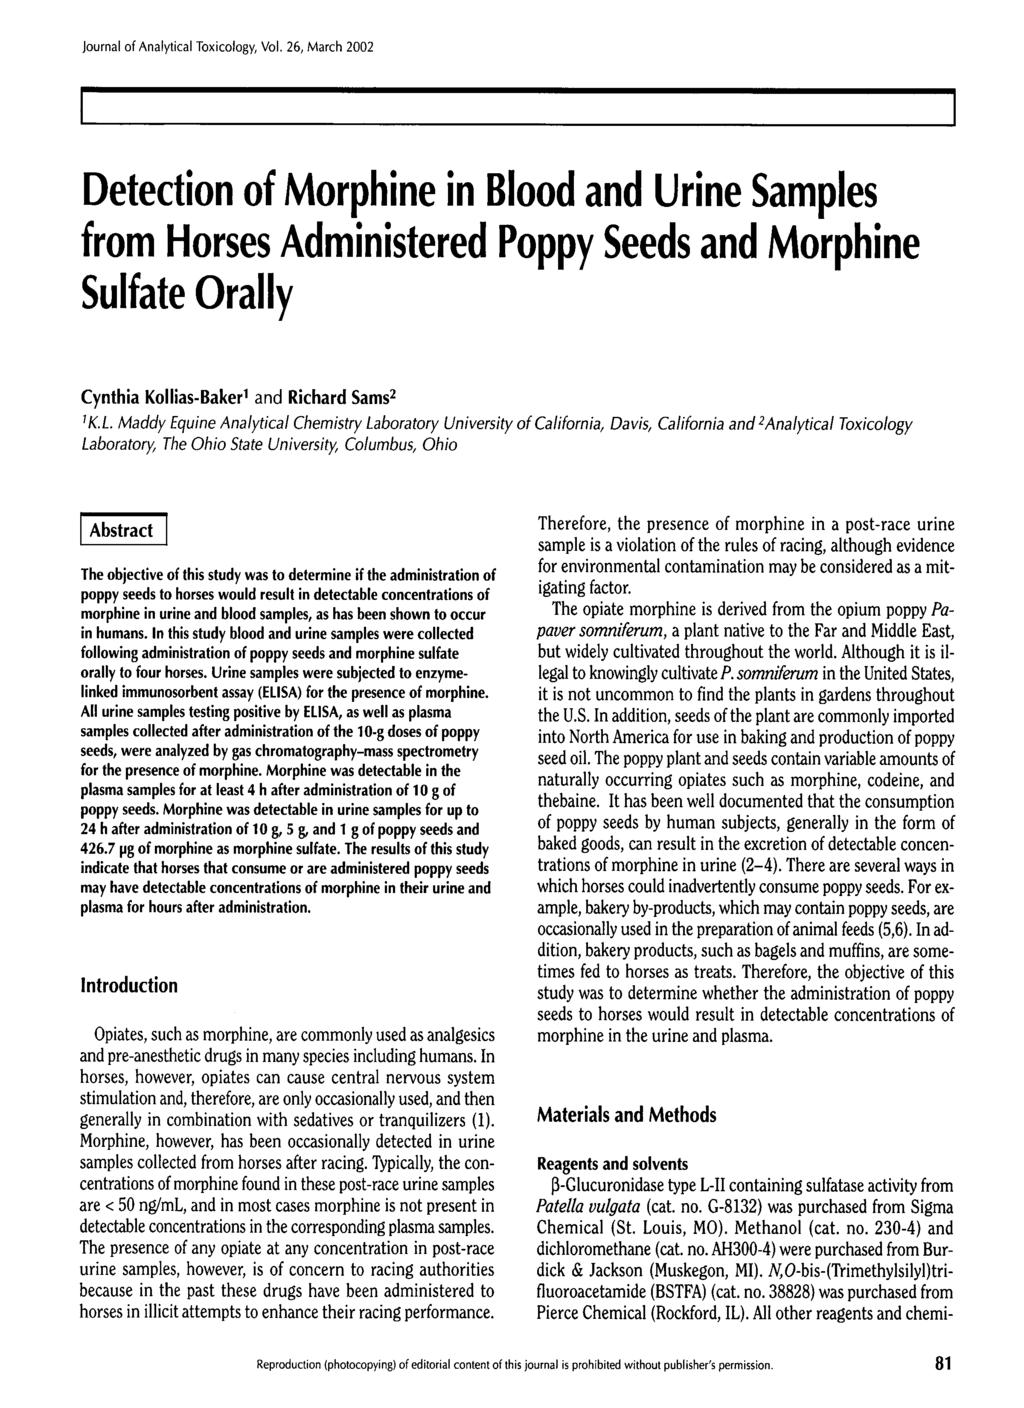 Detection of Morphine in Blood and Urine Samples from Horses Administered Poppy Seeds and Morphine Sulfate Orally Cynthia Kollias-Baker I and Richard Sams 2 1K.L.